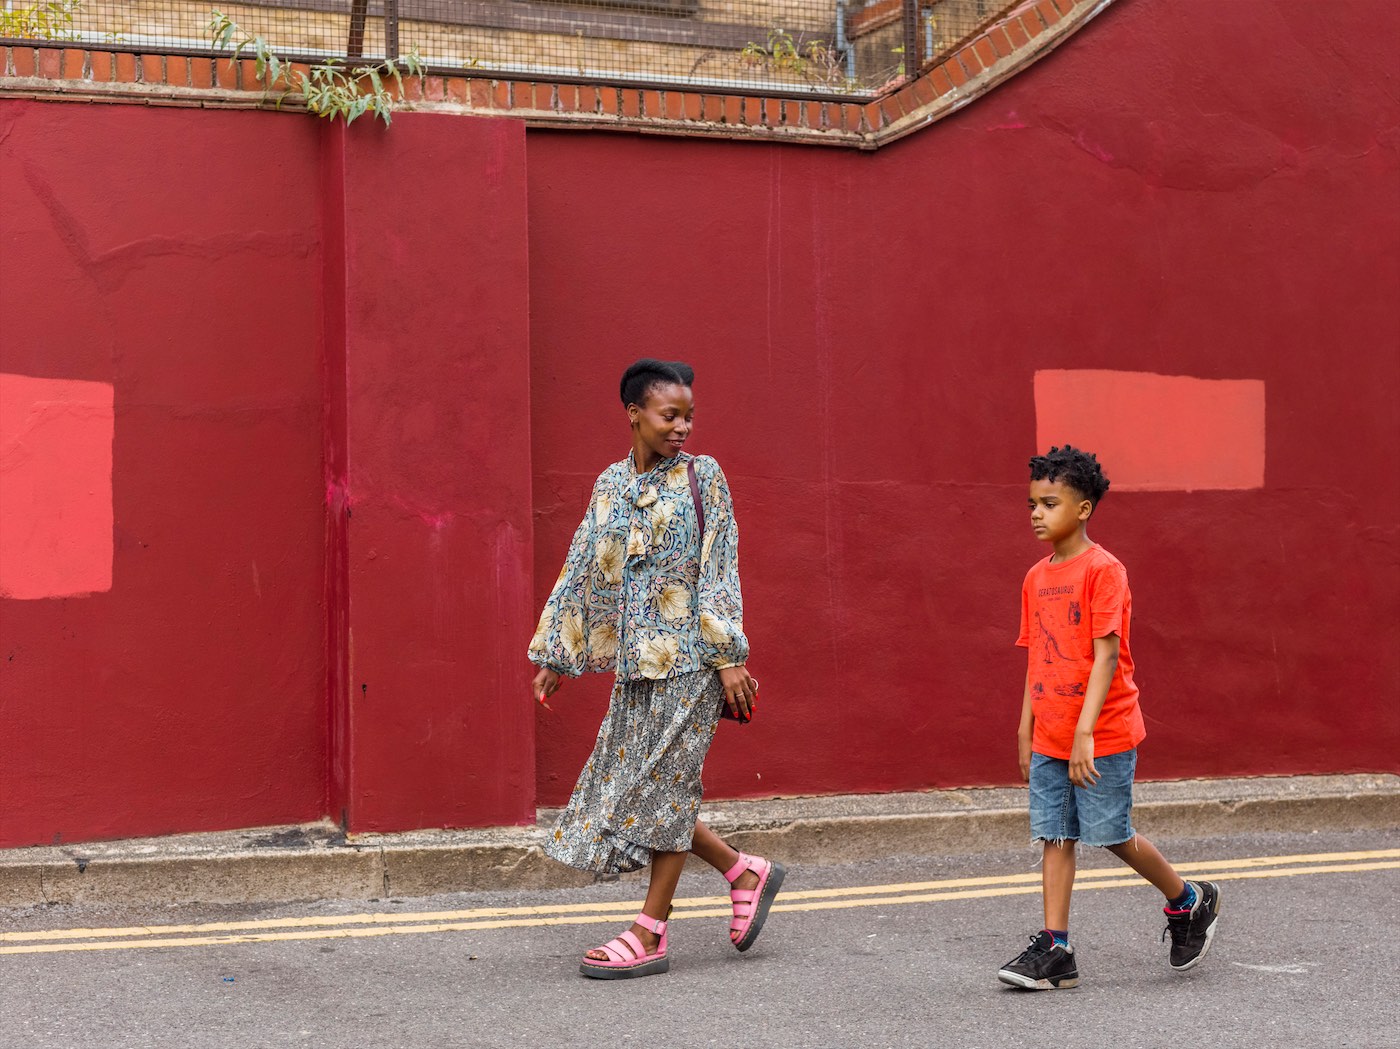 A woman walking slightly ahead of a boy aged around 10. She is smiling at him, while he looks a bit disgruntled. They are walking on a road in front of a bricked wall, painted red, with two patches of lighter red coloured paint. She is stylishly dressed in a long skirt and loose jacket, with fabulous pink, wedged heeled sandals. The boy is wearing a bright red t-shirt, denim shorts and dark trainers.